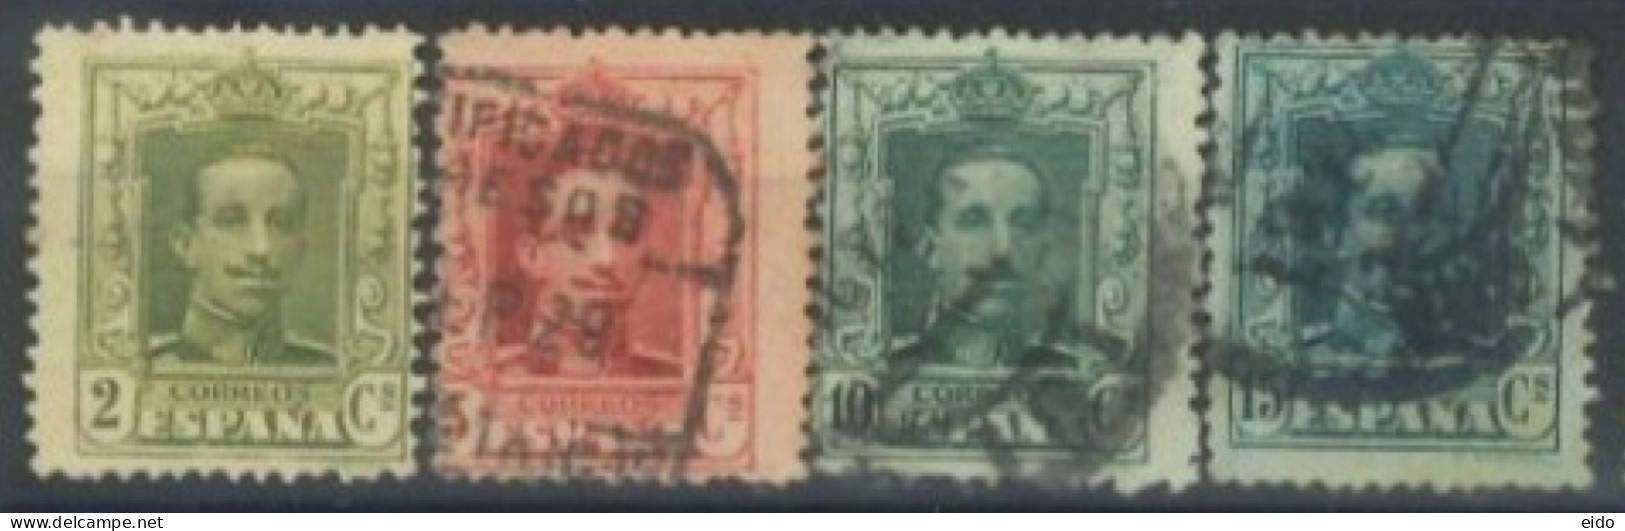 SPAIN, 1922/26, KING ALFONSO XIII STAMPS SET OF 4 # 331/32,335/36, USED. - Gebraucht